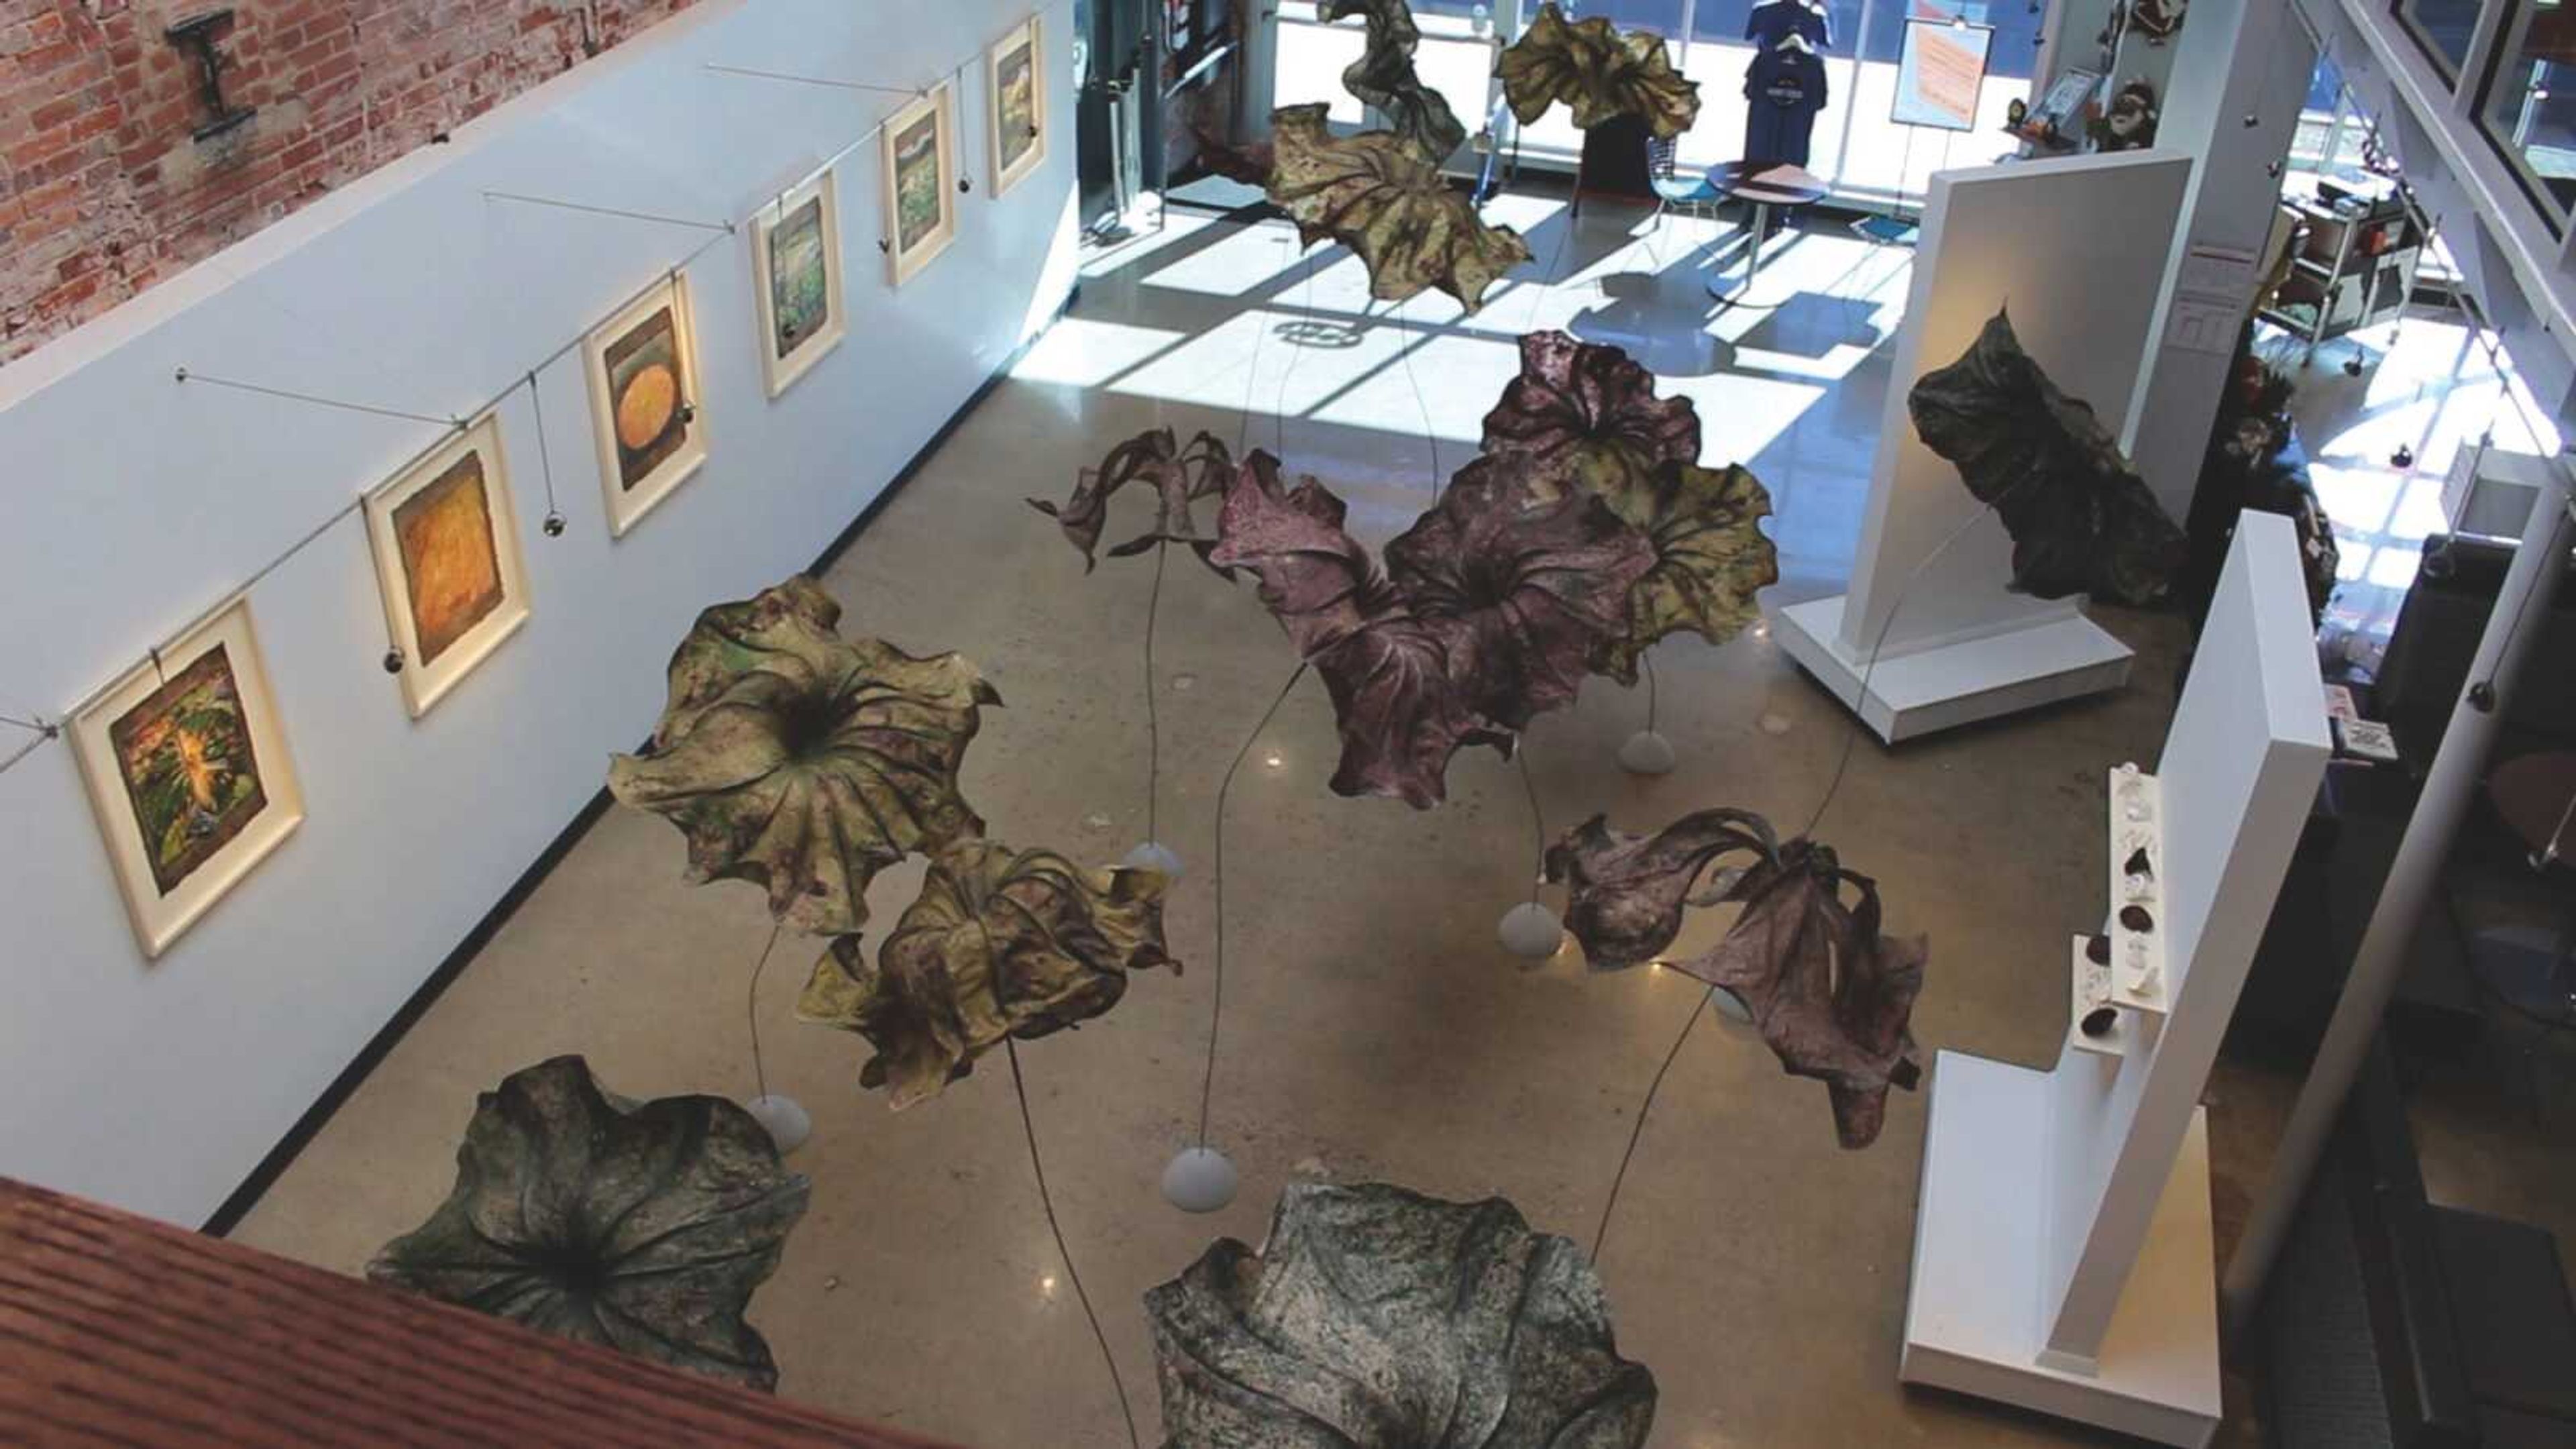 For Catapultâ€™s First Friday events, visiting artist Megan Singleton will open her exhibition, which is called â€śTo Rest Without Sinking,â€ť featuring paper sculptures of invasive plant species.